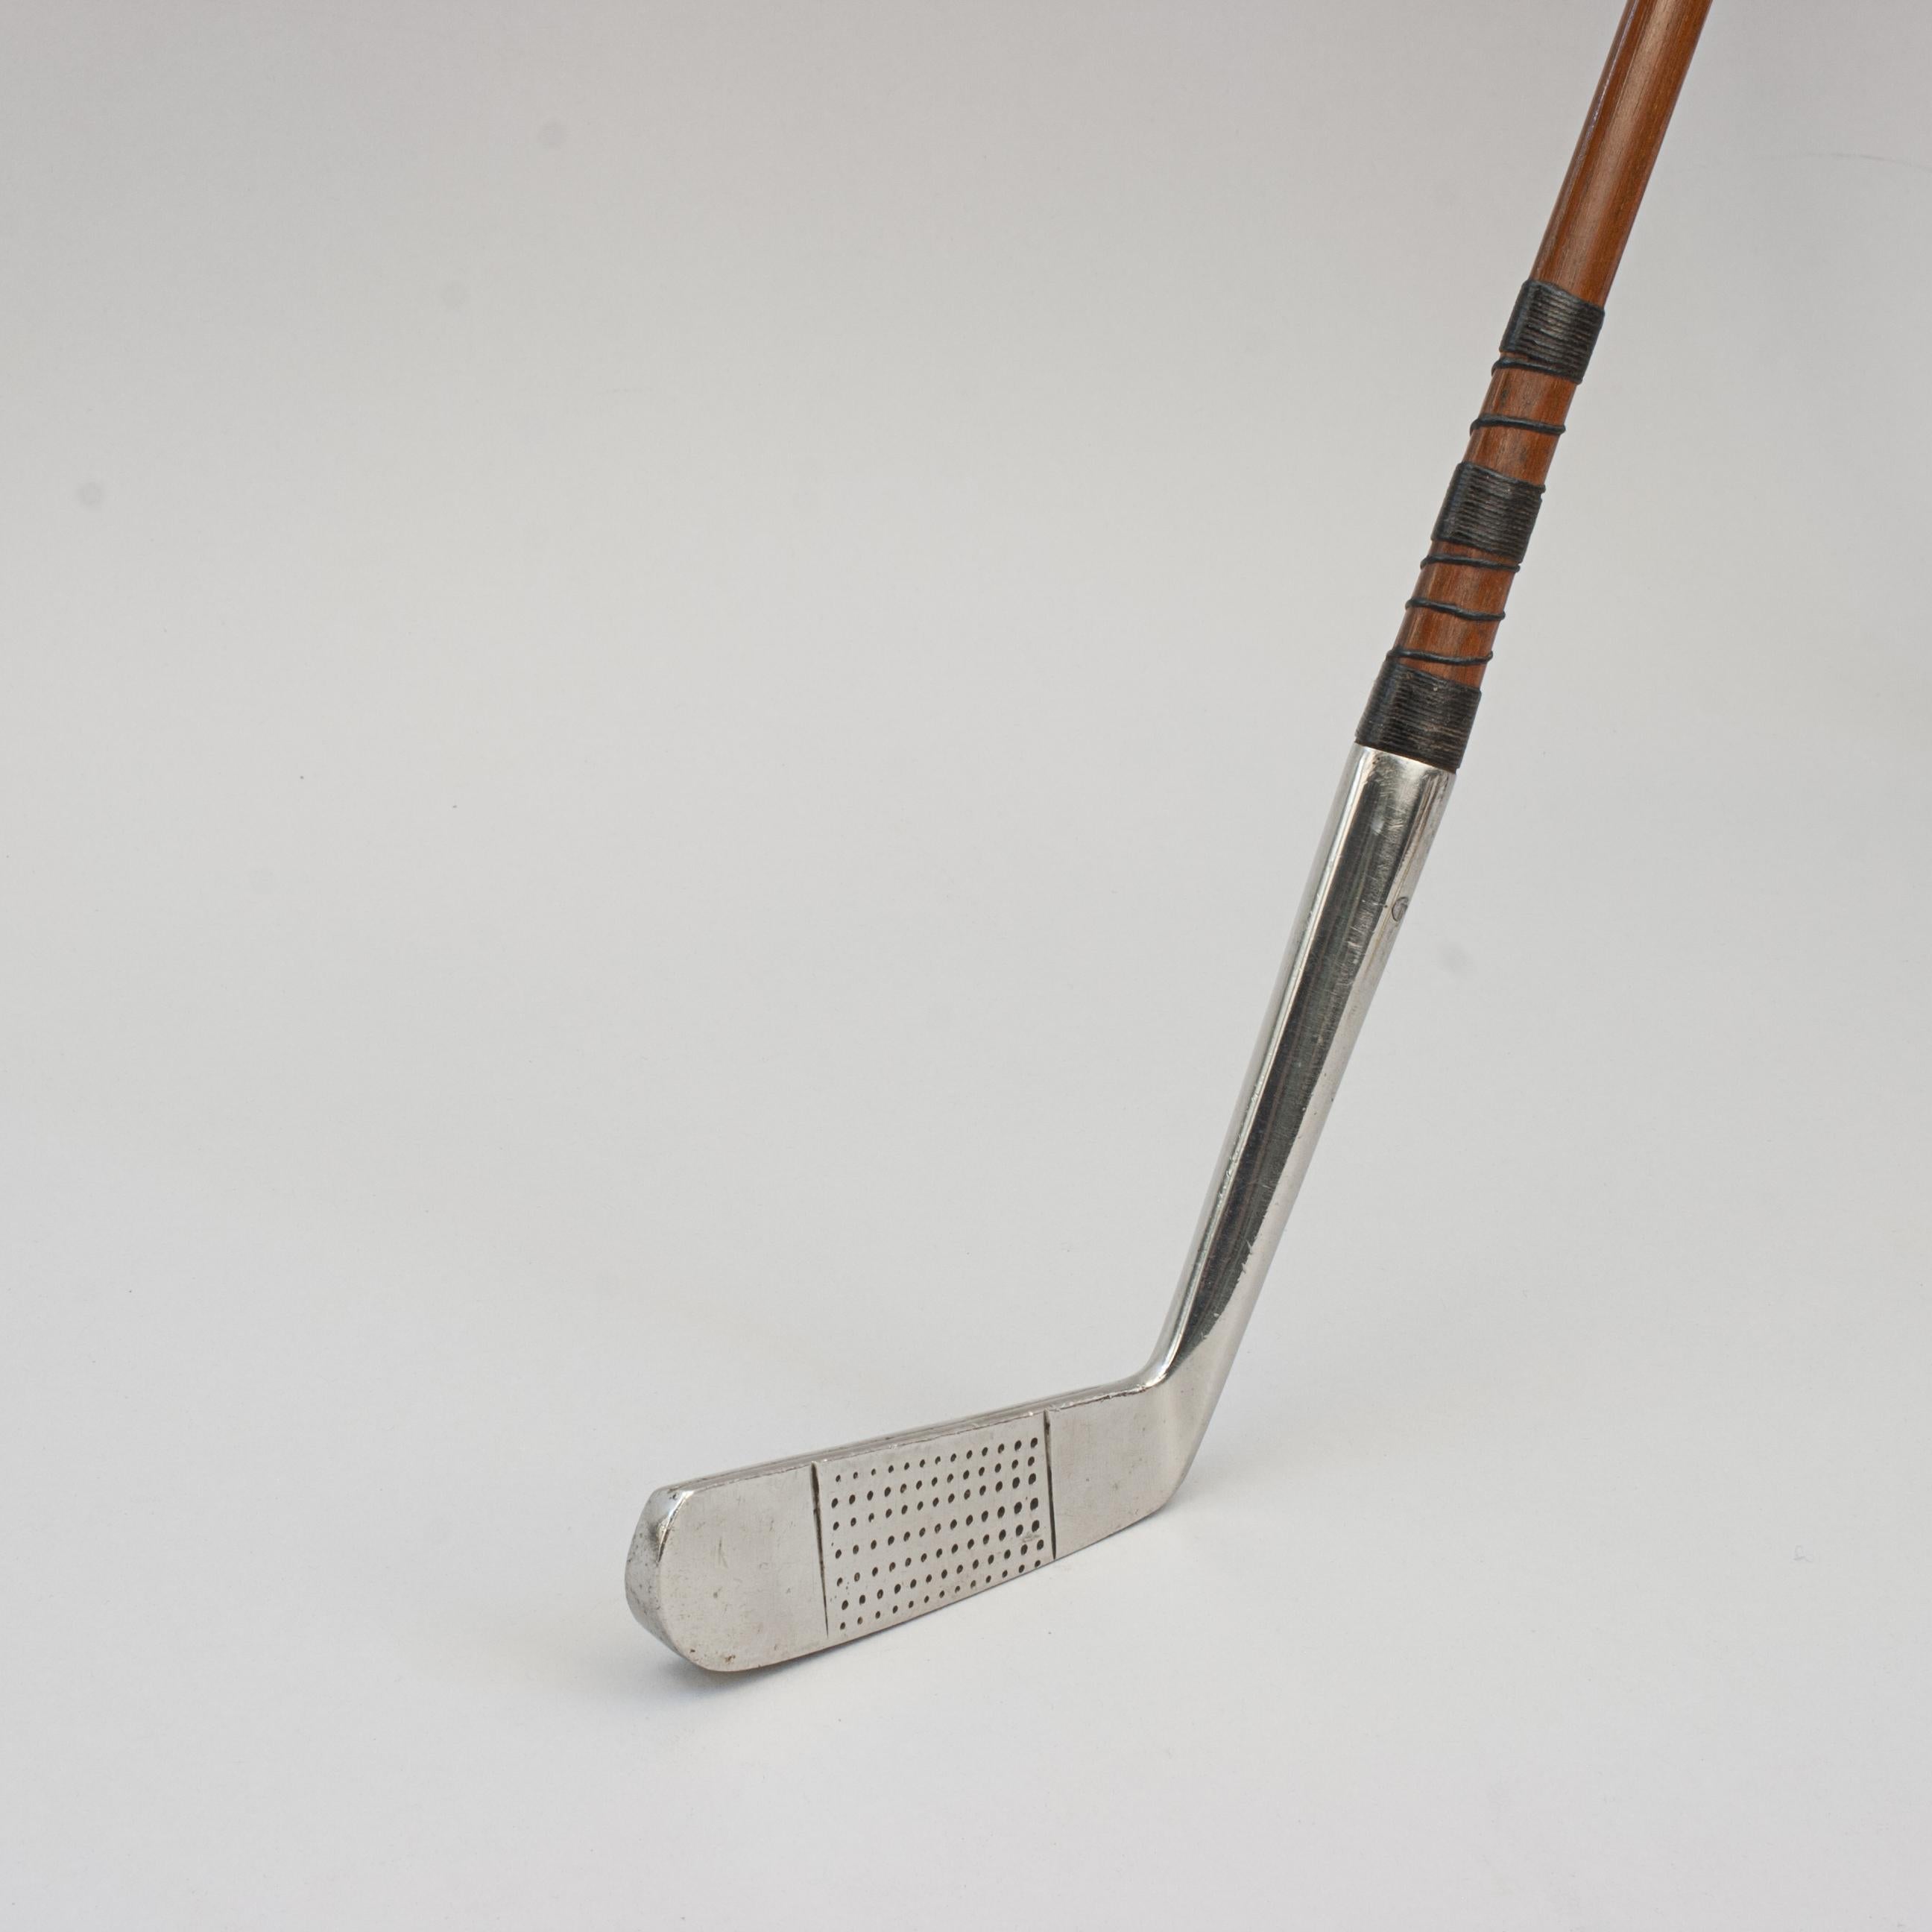 PERFECT PUTTER, M.J. Lewis.
A fine, patent blade putter with unusual ovoid shaped shaft. The shaft is made from greenheart or danga wood, is teardrop shaped with the point to the front but terminating into a square grip, all to help with alignment.